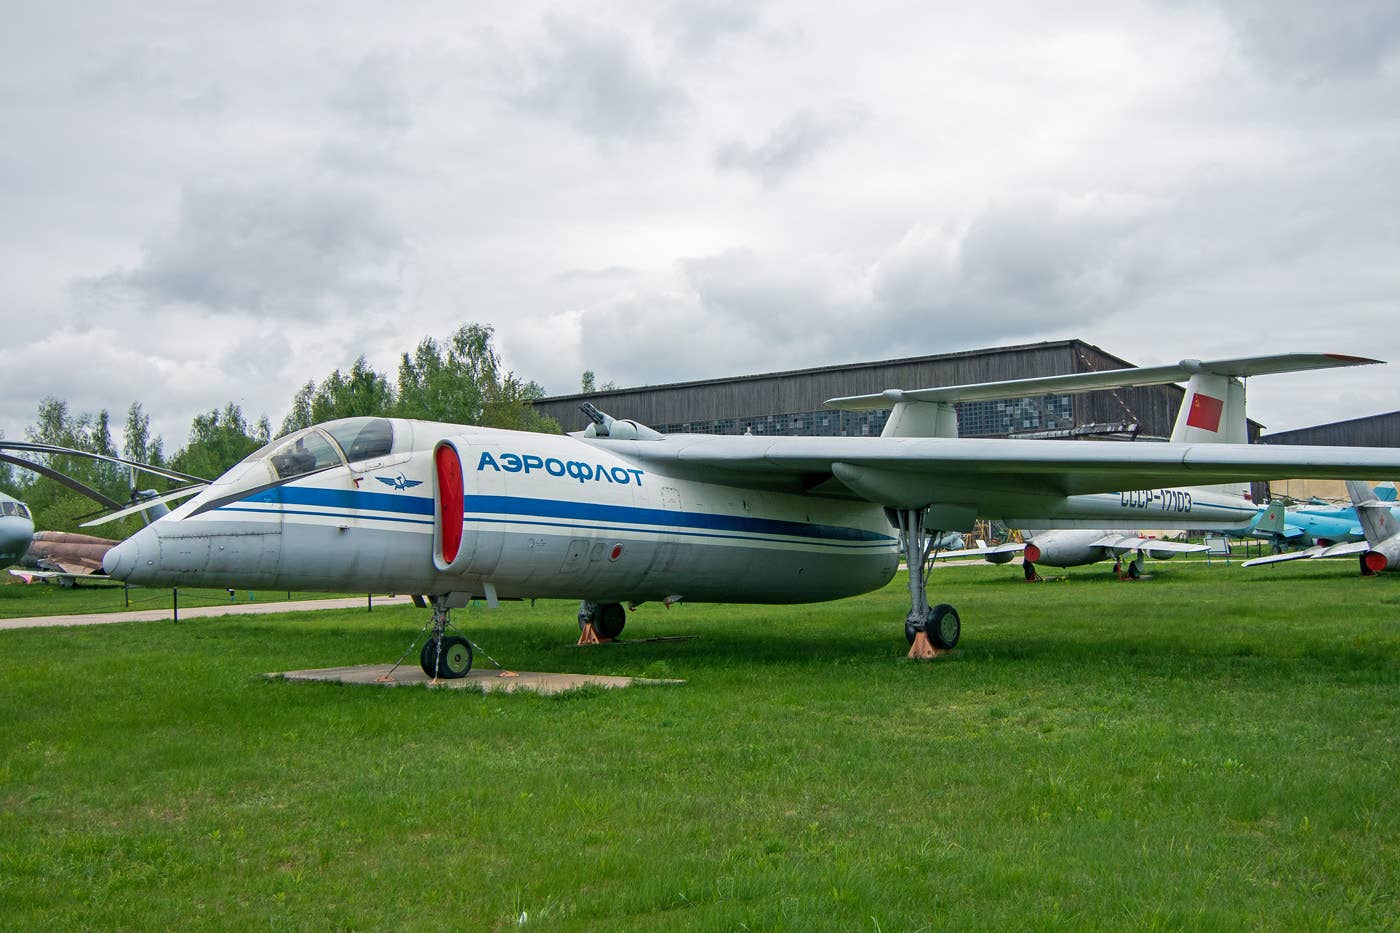 CCCP-17103, the first true flying M-17 at the museum in Monino. A few years ago a mock-up of the gun turret was installed on the top of the fuselage. In fact, this aircraft never flew in such a form. But it did always wear the quasi-civilian Aeroflot livery. <em>Piotr Butowski</em>